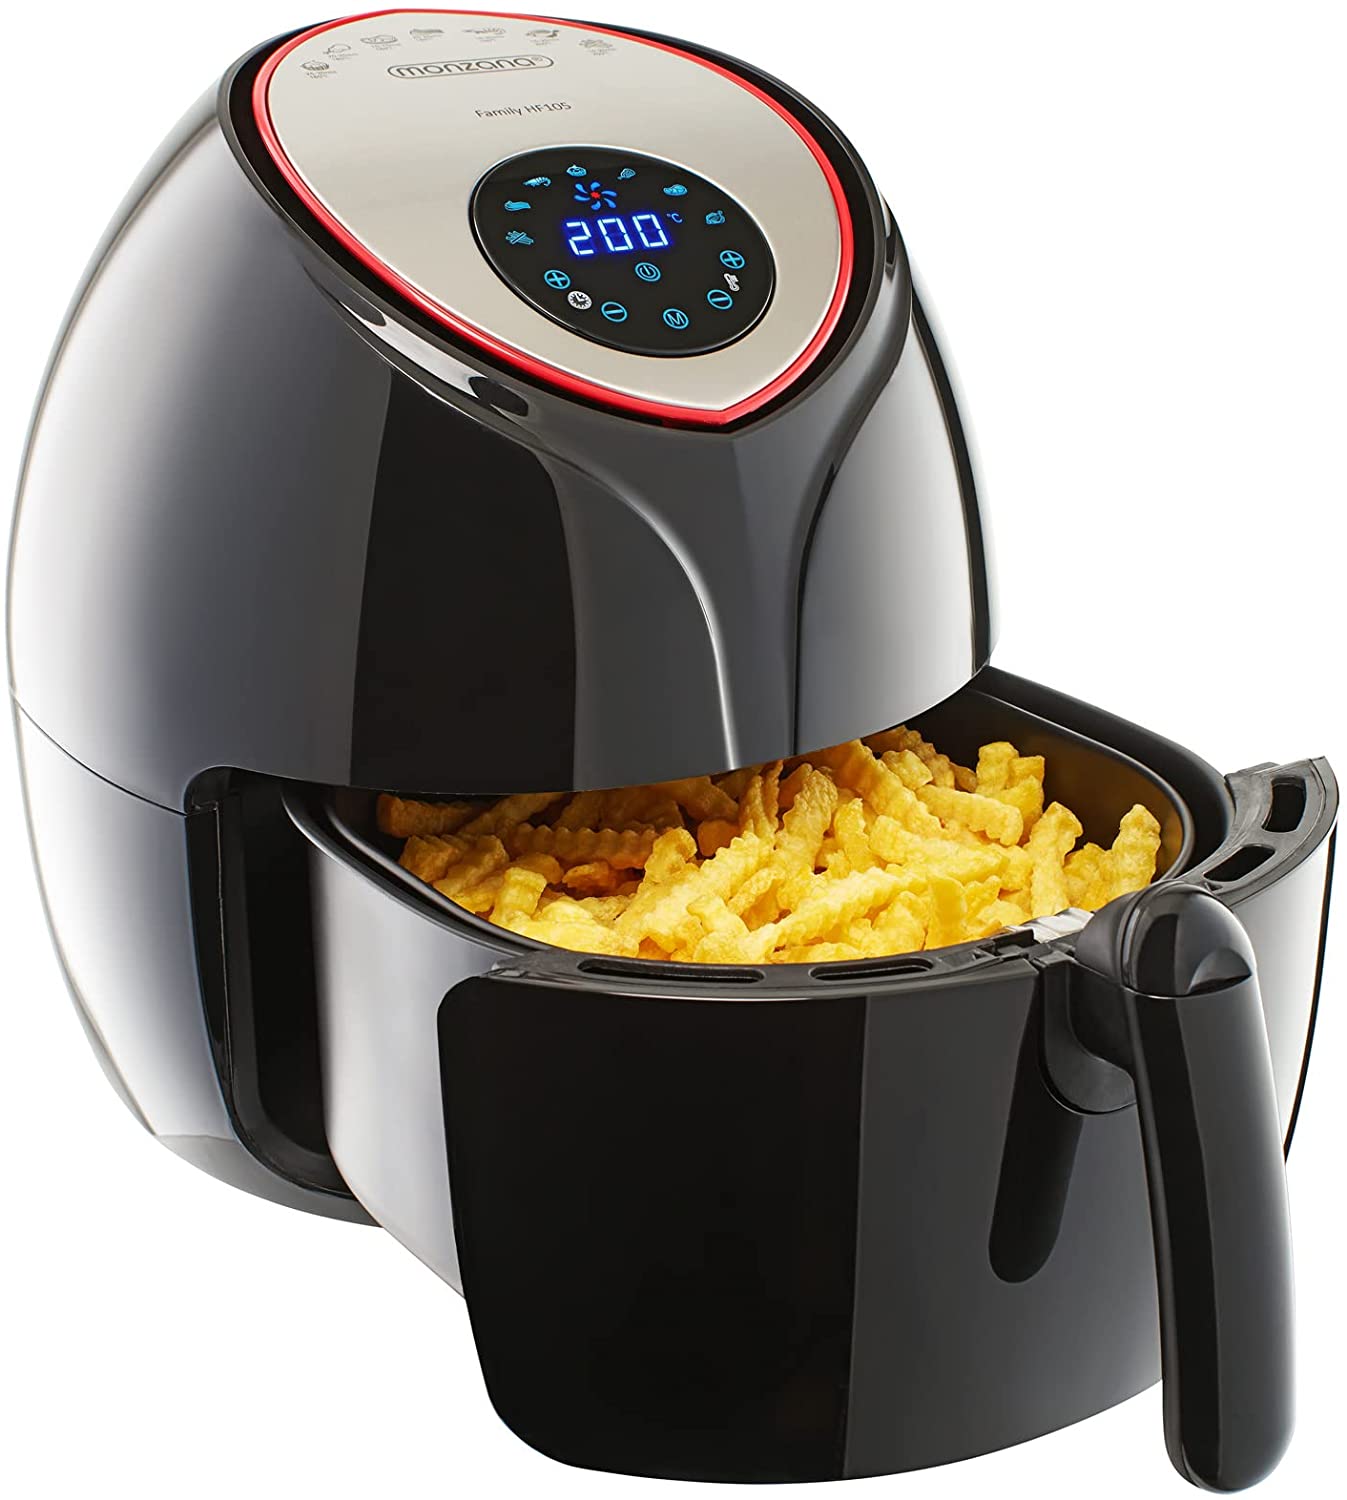 Monzana Hot Air Fryer, 6.5 Litres, XXL Deep Fryer, Digital LED Touch Screen 1,850W with Free Recipe Book (English language not guaranteed), 9-in-1, No Fat or Oil